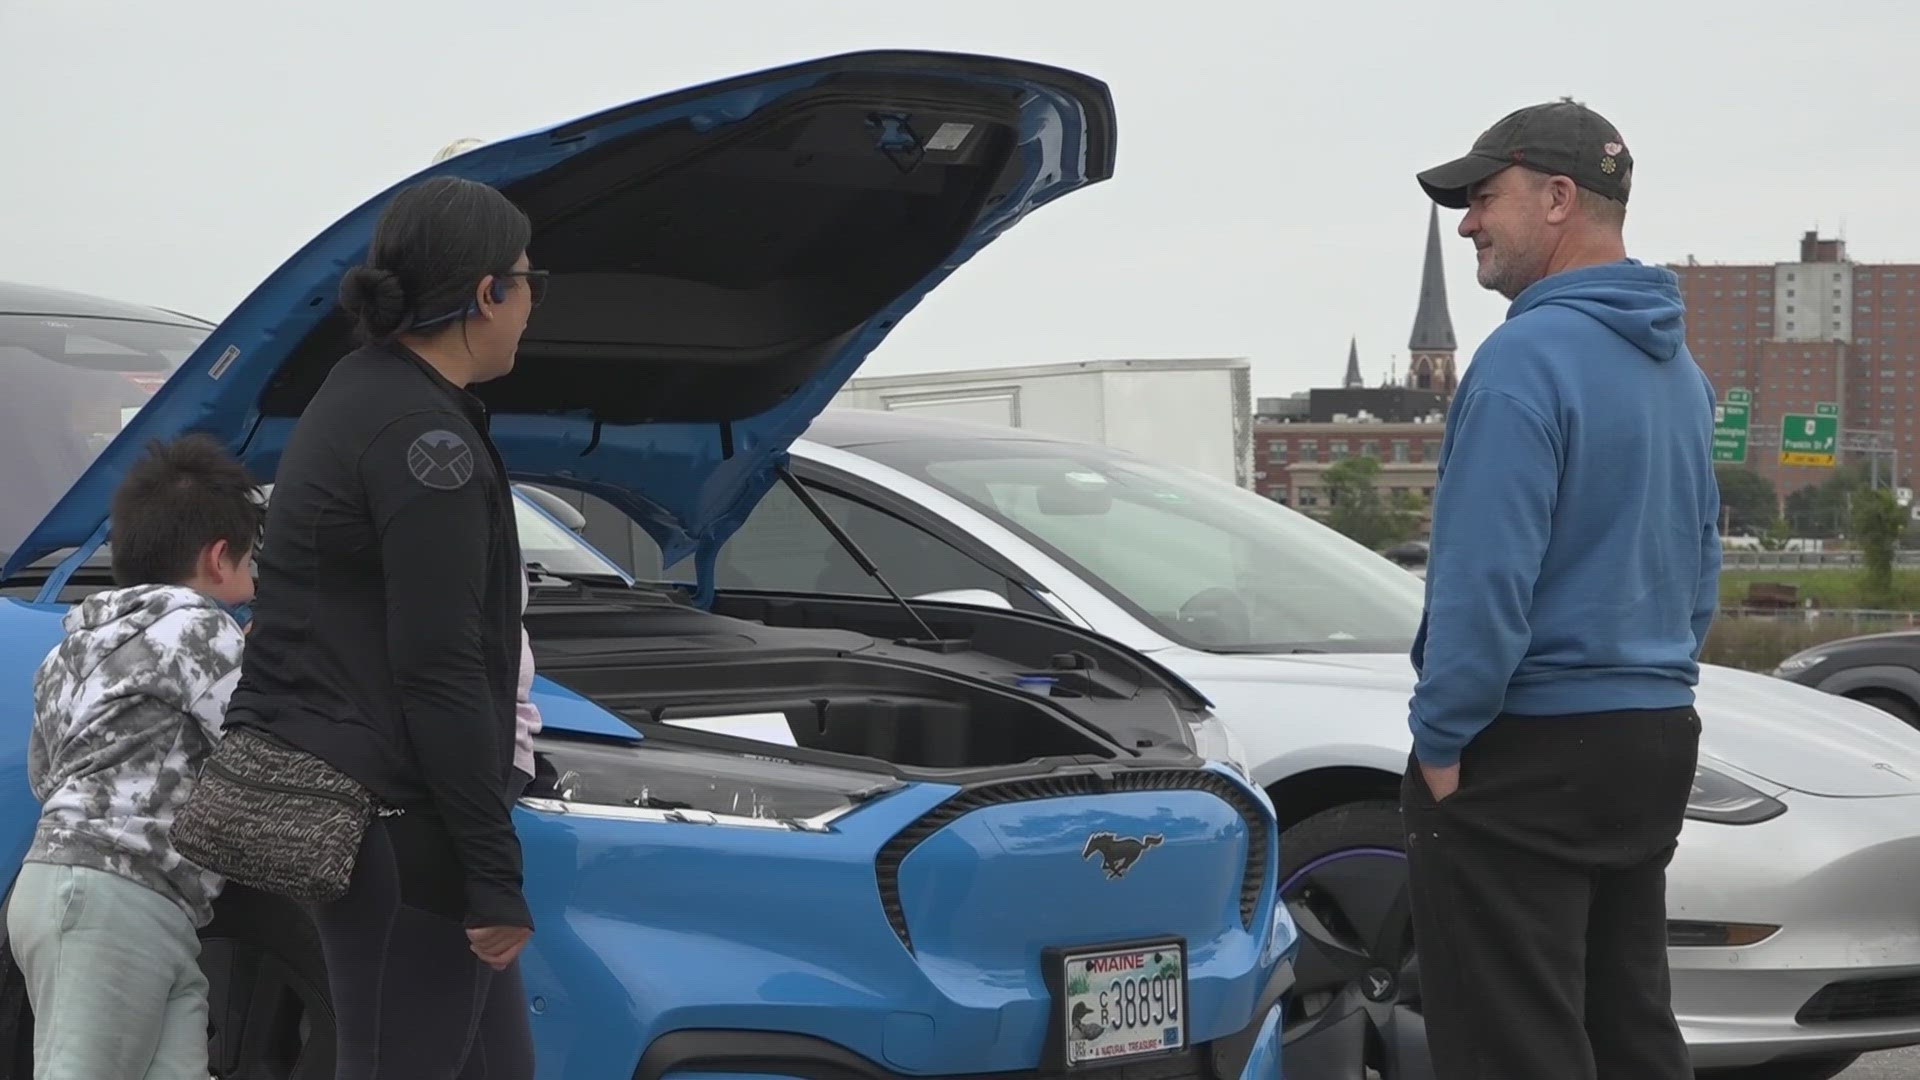 The nationwide initiative is to raise awareness for electric vehicle options, which a study shows is growing in popularity across Maine.